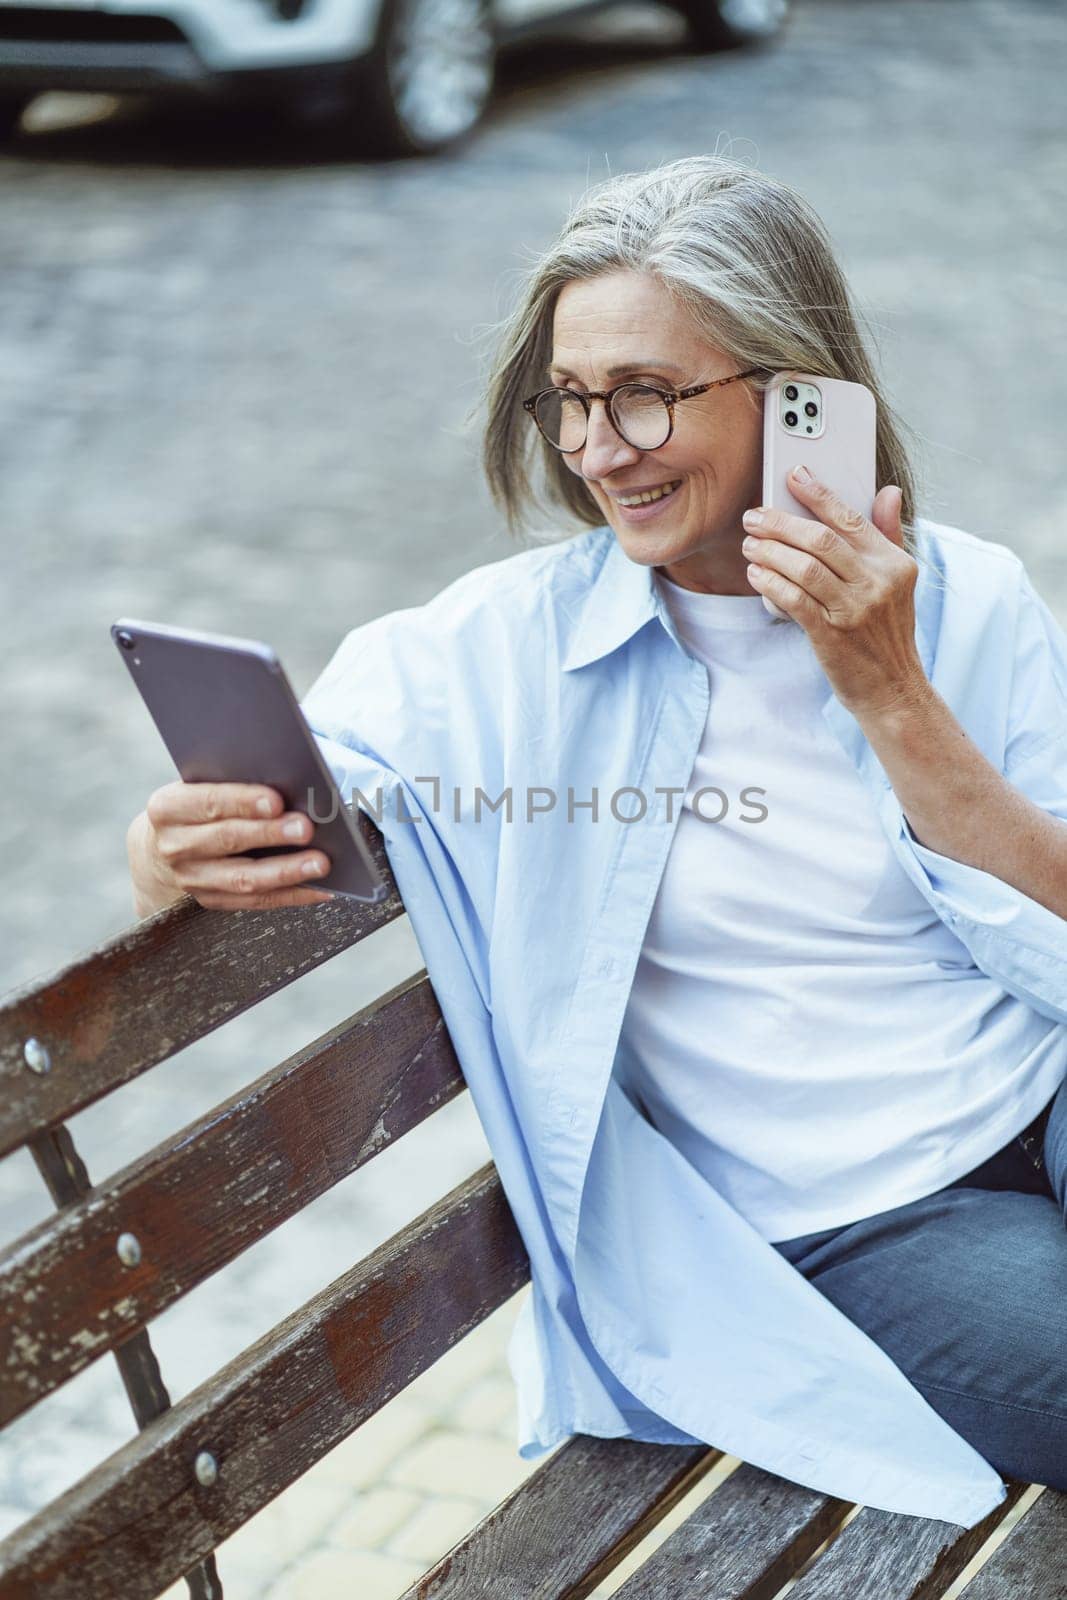 Senior woman searching for information online and speaking on mobile phone. Lady's use of technology to access information and maintain communication while enjoying ambiance of the historic city. . High quality photo